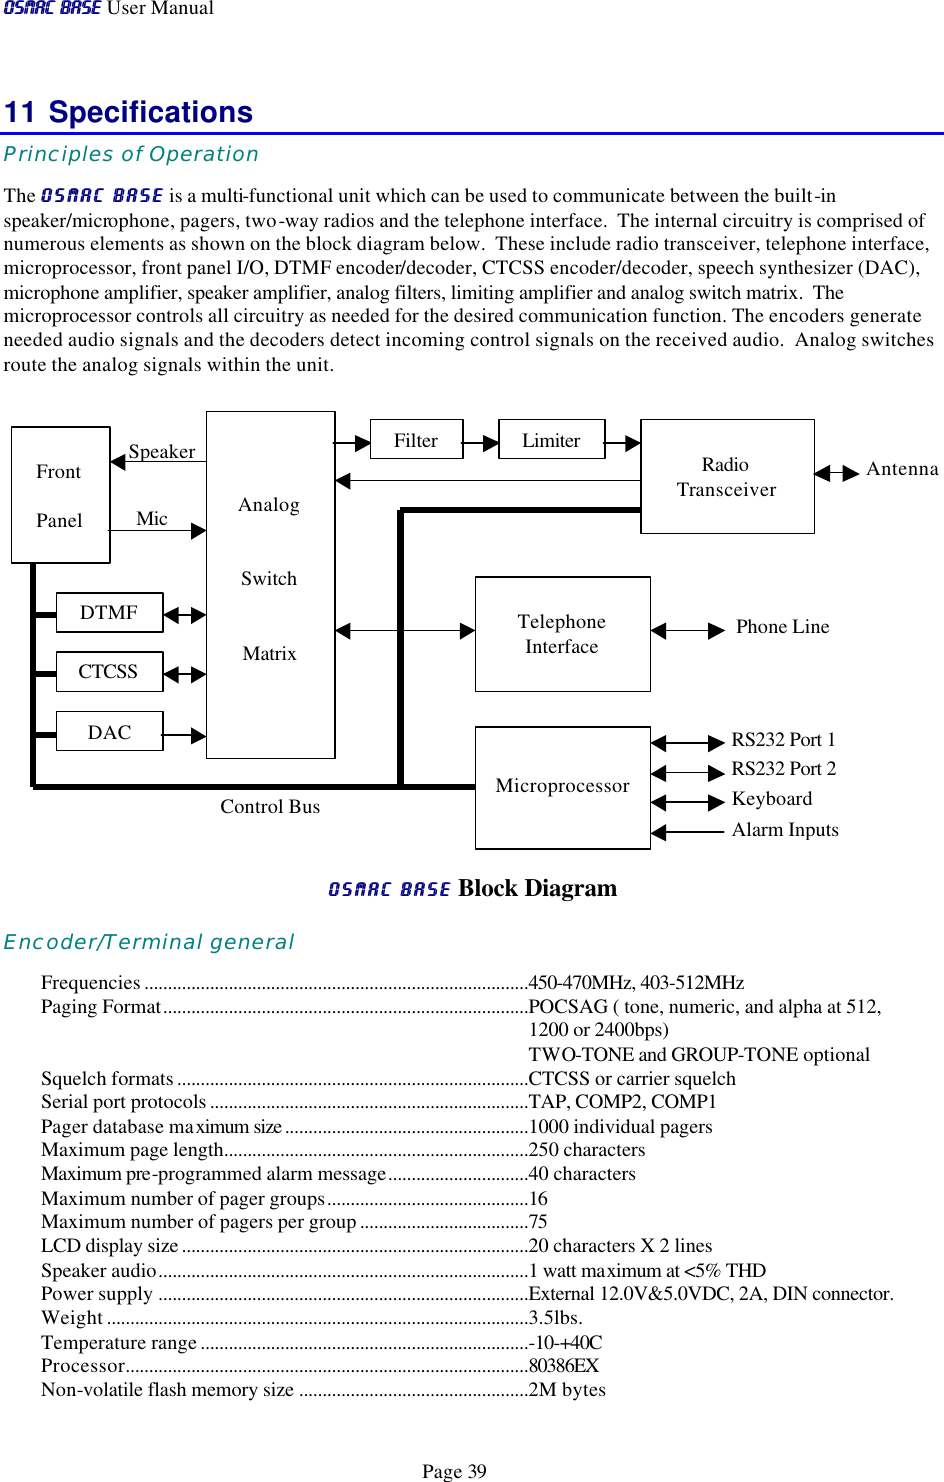 OSMAC BaseOSMAC Base User Manual      Page 39 11 Specifications Principles of Operation The OSMAC BaseOSMAC Base is a multi-functional unit which can be used to communicate between the built-in speaker/microphone, pagers, two-way radios and the telephone interface.  The internal circuitry is comprised of  numerous elements as shown on the block diagram below.  These include radio transceiver, telephone interface, microprocessor, front panel I/O, DTMF encoder/decoder, CTCSS encoder/decoder, speech synthesizer (DAC), microphone amplifier, speaker amplifier, analog filters, limiting amplifier and analog switch matrix.  The microprocessor controls all circuitry as needed for the desired communication function. The encoders generate needed audio signals and the decoders detect incoming control signals on the received audio.  Analog switches route the analog signals within the unit.              OSMAC BaseOSMAC Base Block Diagram Encoder/Terminal general Frequencies ..................................................................................450-470MHz, 403-512MHz Paging Format..............................................................................POCSAG ( tone, numeric, and alpha at 512, 1200 or 2400bps) TWO-TONE and GROUP-TONE optional Squelch formats ...........................................................................CTCSS or carrier squelch Serial port protocols ....................................................................TAP, COMP2, COMP1 Pager database maximum size ....................................................1000 individual pagers Maximum page length.................................................................250 characters Maximum pre-programmed alarm message..............................40 characters Maximum number of pager groups...........................................16 Maximum number of pagers per group ....................................75 LCD display size ..........................................................................20 characters X 2 lines Speaker audio...............................................................................1 watt maximum at &lt;5% THD Power supply ...............................................................................External 12.0V&amp;5.0VDC, 2A, DIN connector.  Weight ..........................................................................................3.5lbs. Temperature range ......................................................................-10-+40C Processor......................................................................................80386EX Non-volatile flash memory size .................................................2M bytes Control Bus Mic Speaker Antenna   Analog  Switch  Matrix  Radio Transceiver  Front  Panel Filter Limiter  Telephone Interface Phone Line DTMF CTCSS DAC  Microprocessor RS232 Port 1 RS232 Port 2 Keyboard Alarm Inputs 